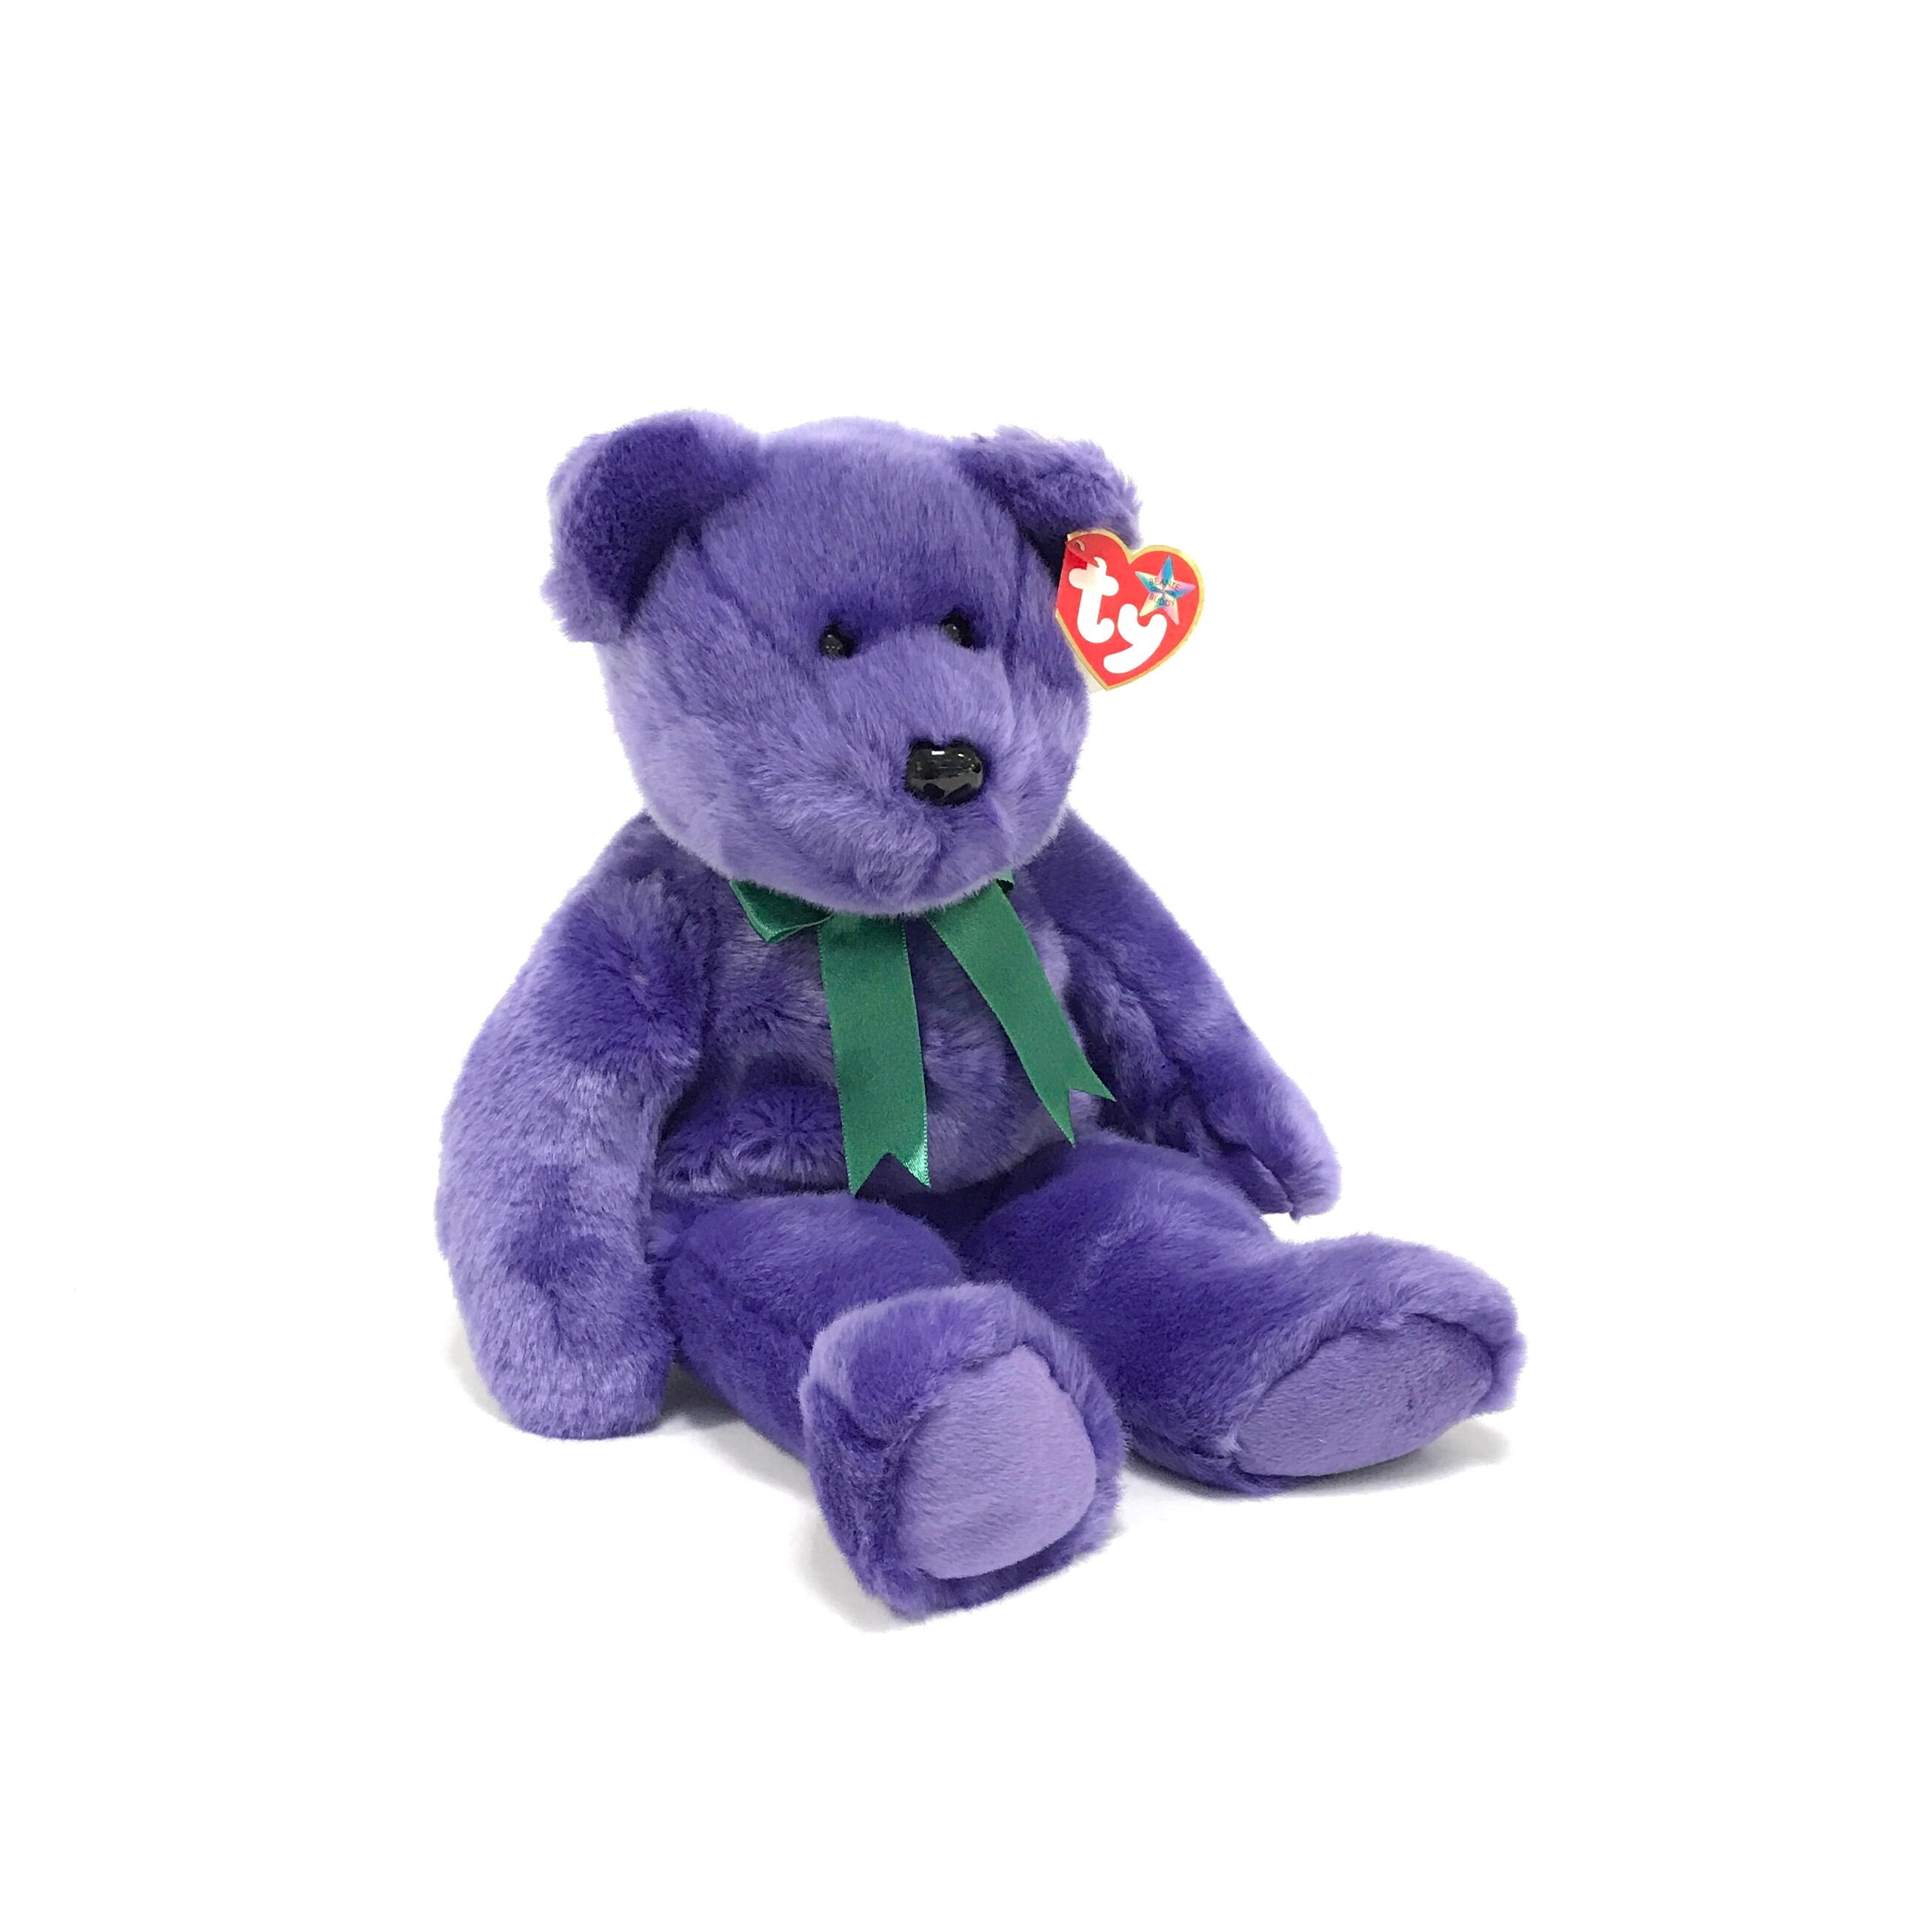 TY Employee Bear Purple w/ Green Bow 2000 THE BEANIE BUDDIES COLLECTION 